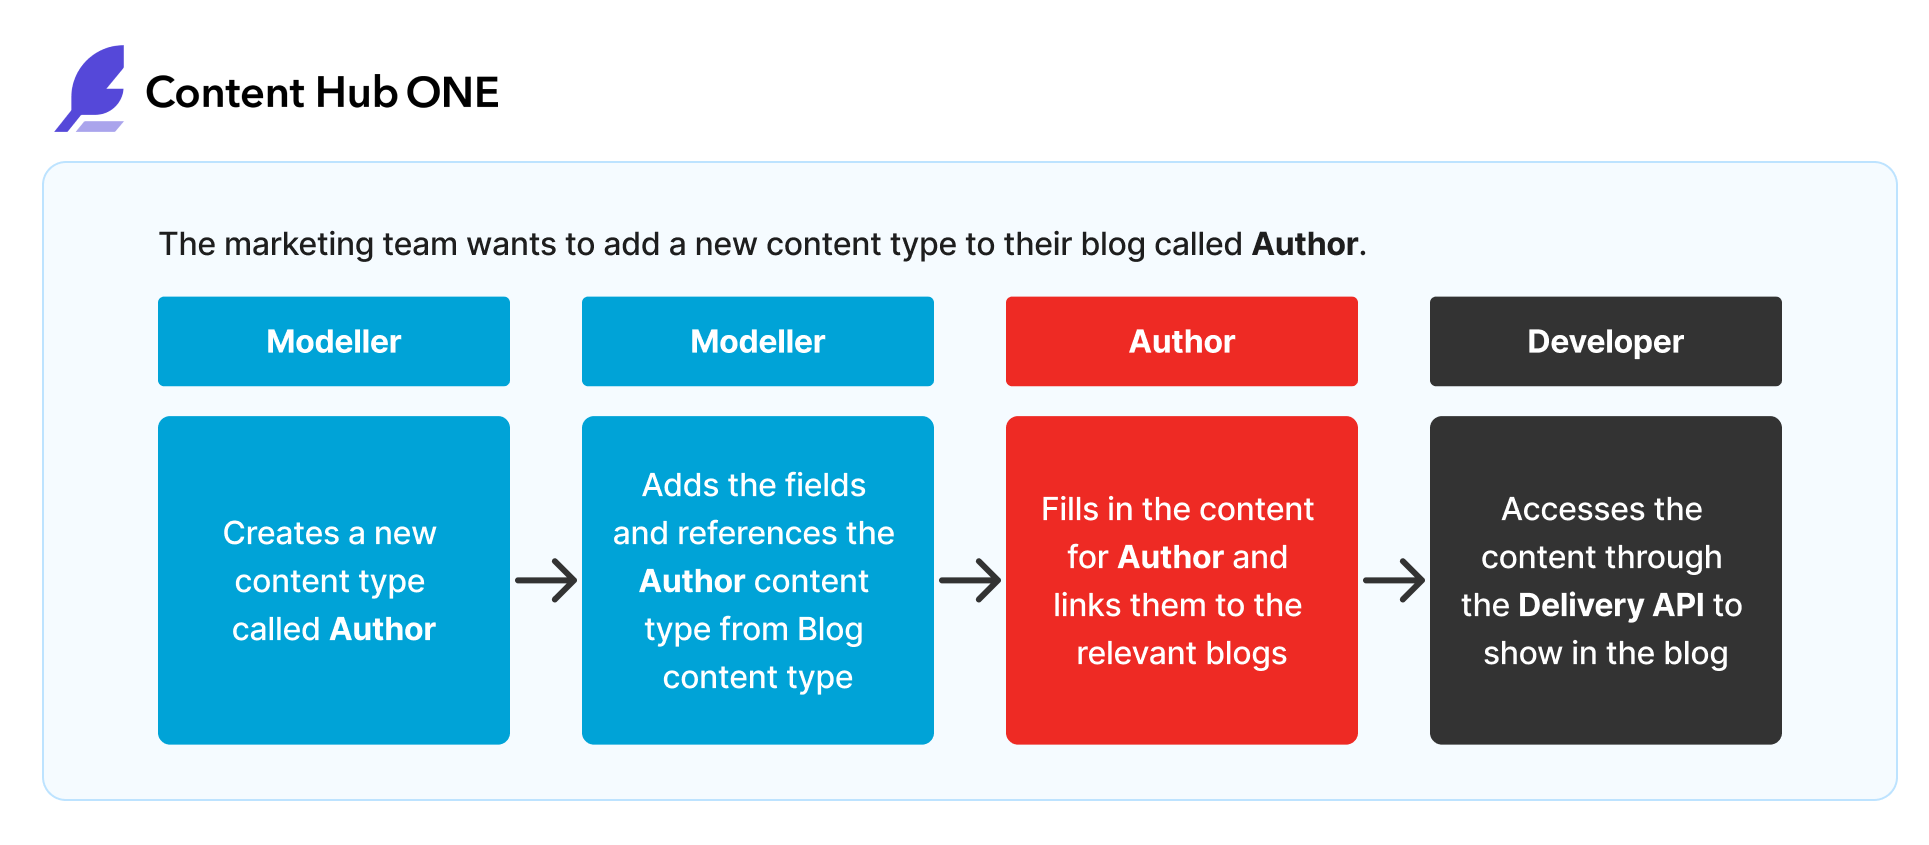 Content Hub ONE Content Model Example